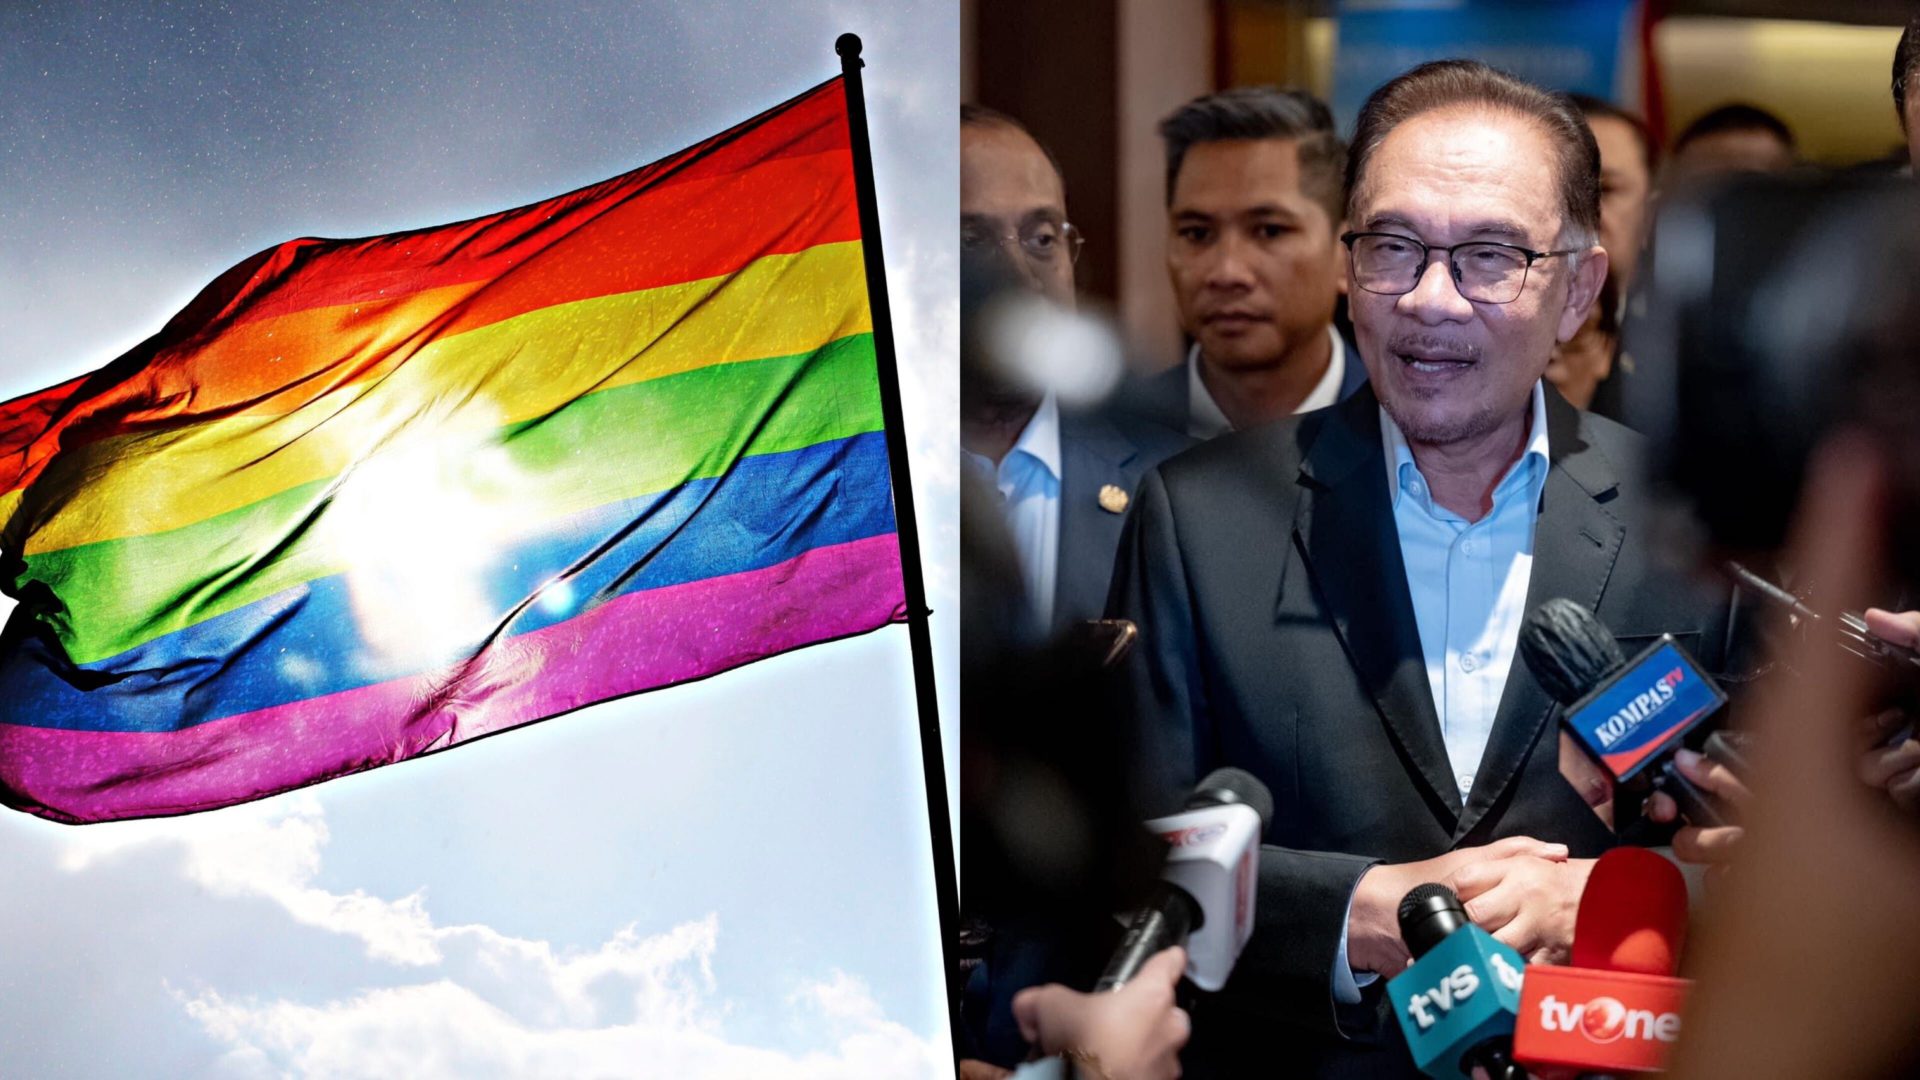 Anwar Ibrahim is perpetuating the weaponization of LGBTphobia in Malaysia, putting lives in danger | Opinion thumbnail